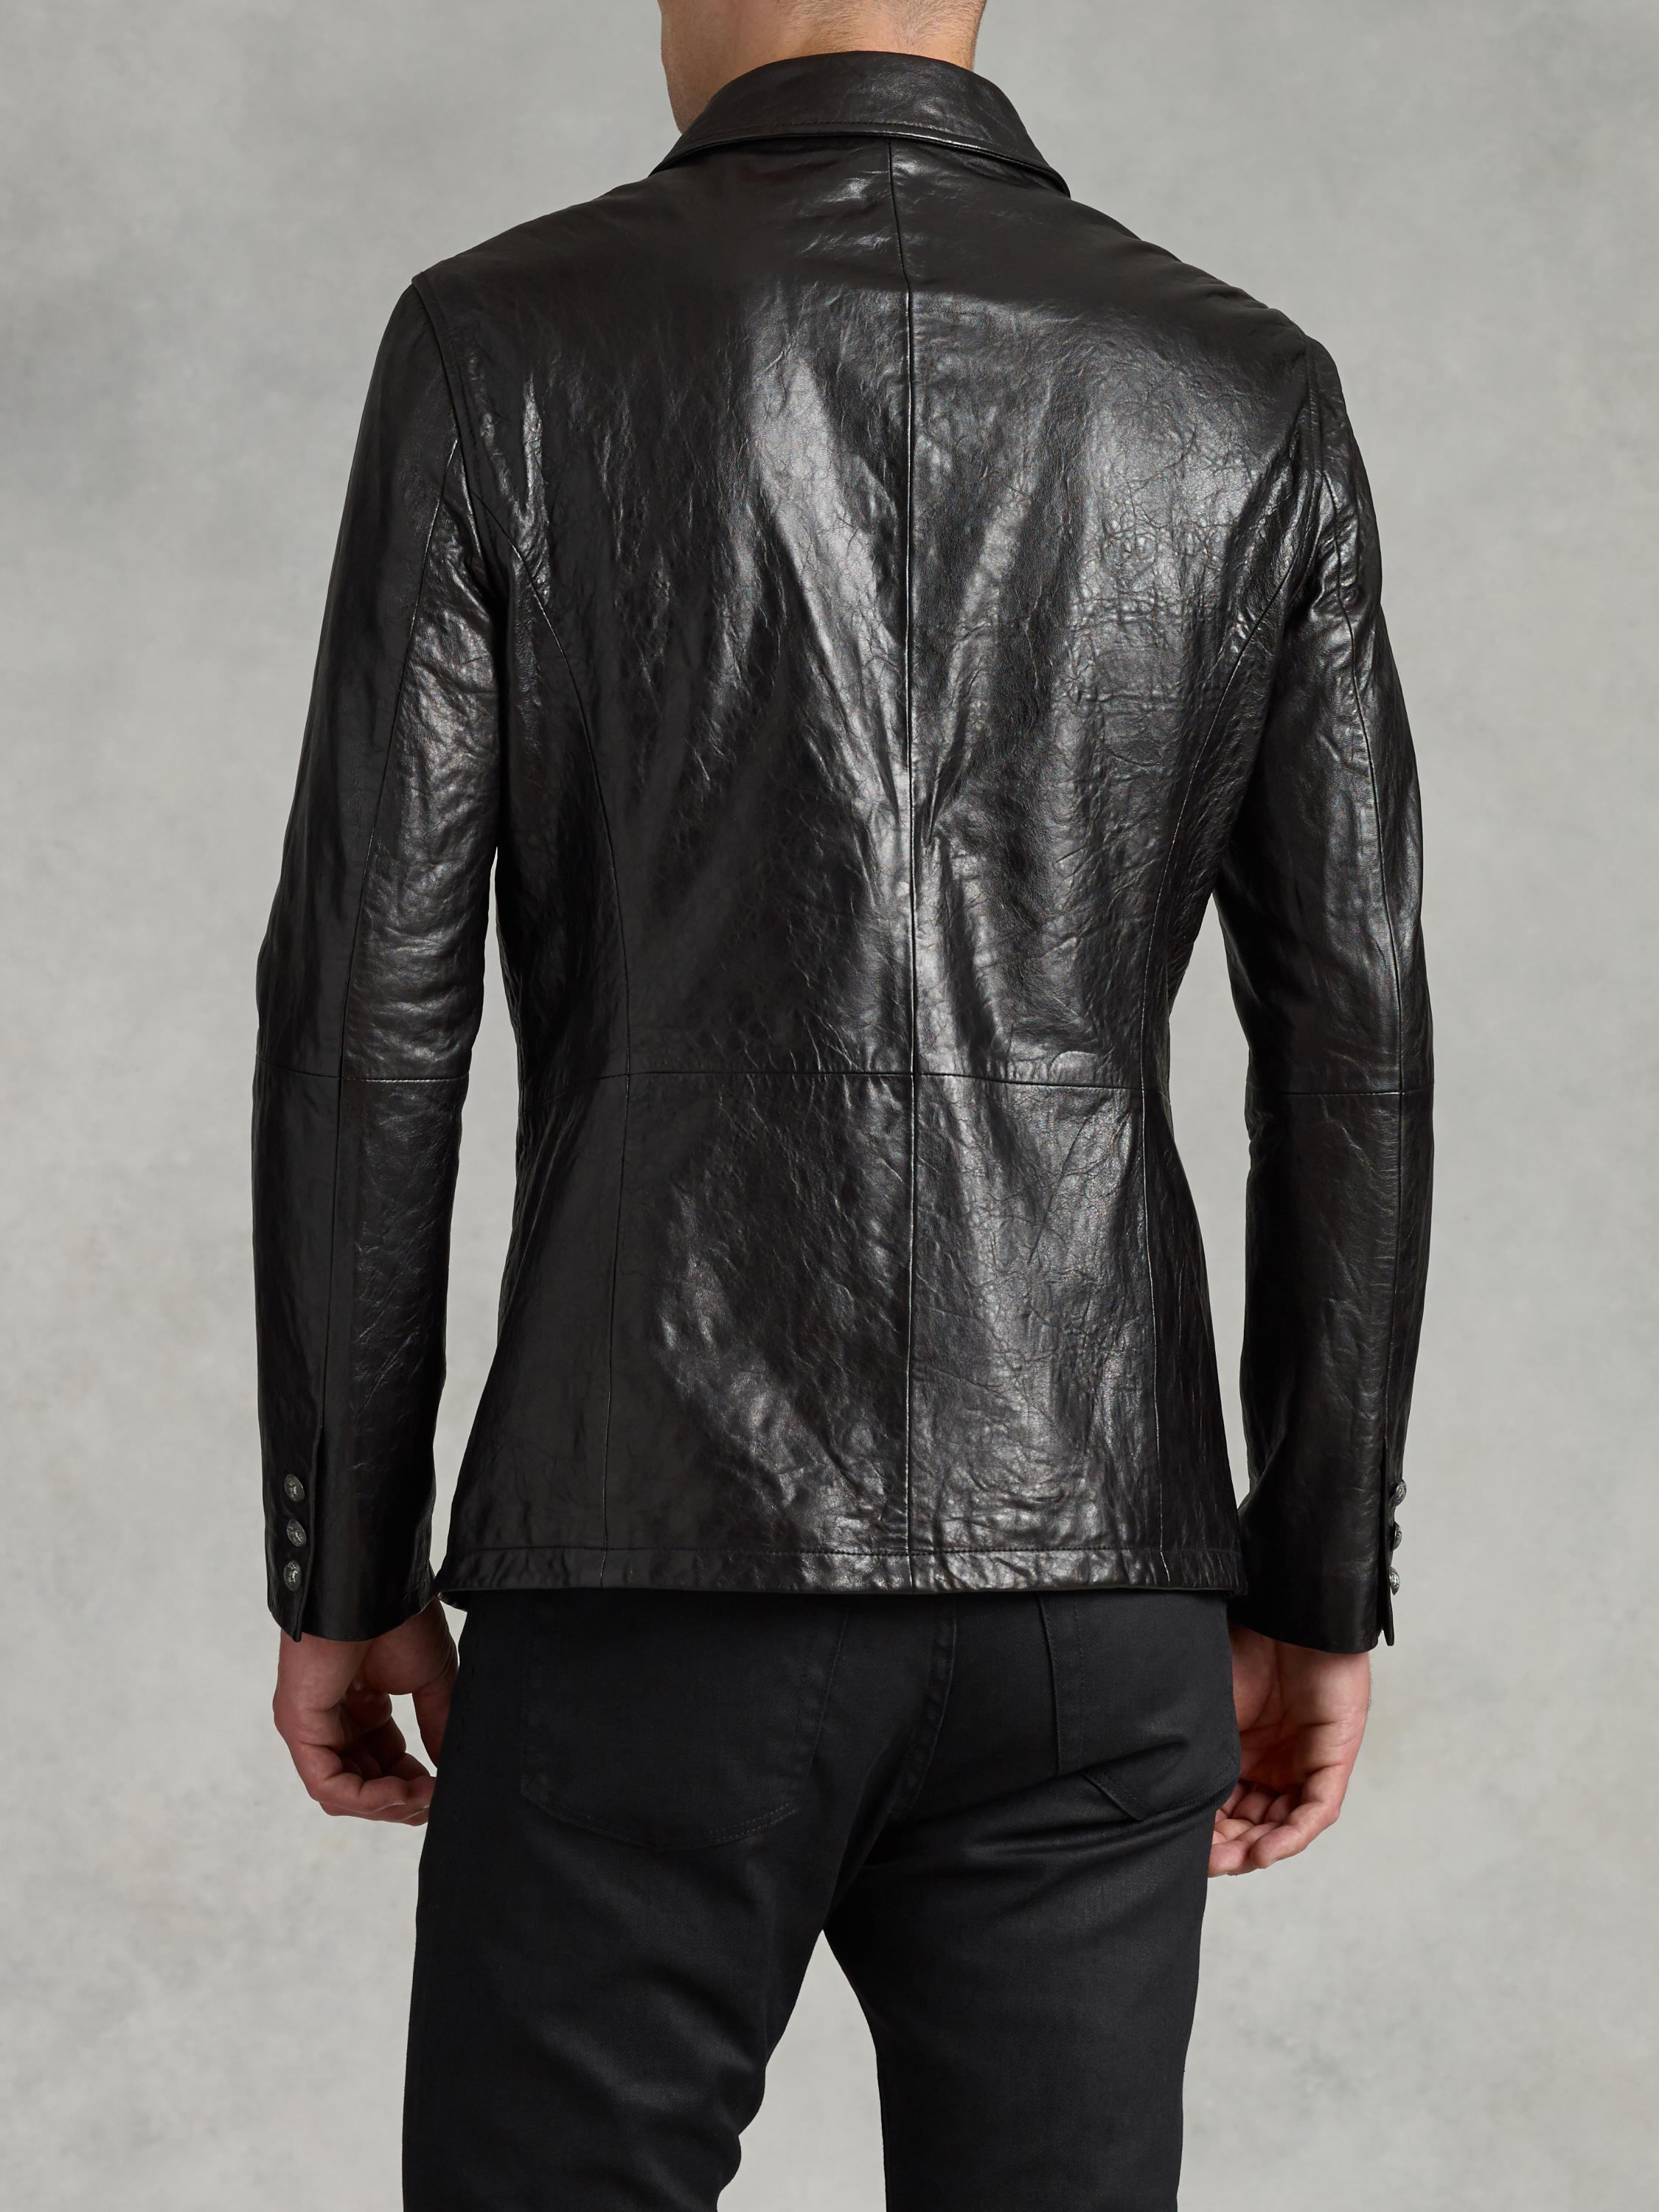 John Varvatos Double Breasted Leather Jacket in Black for Men - Lyst